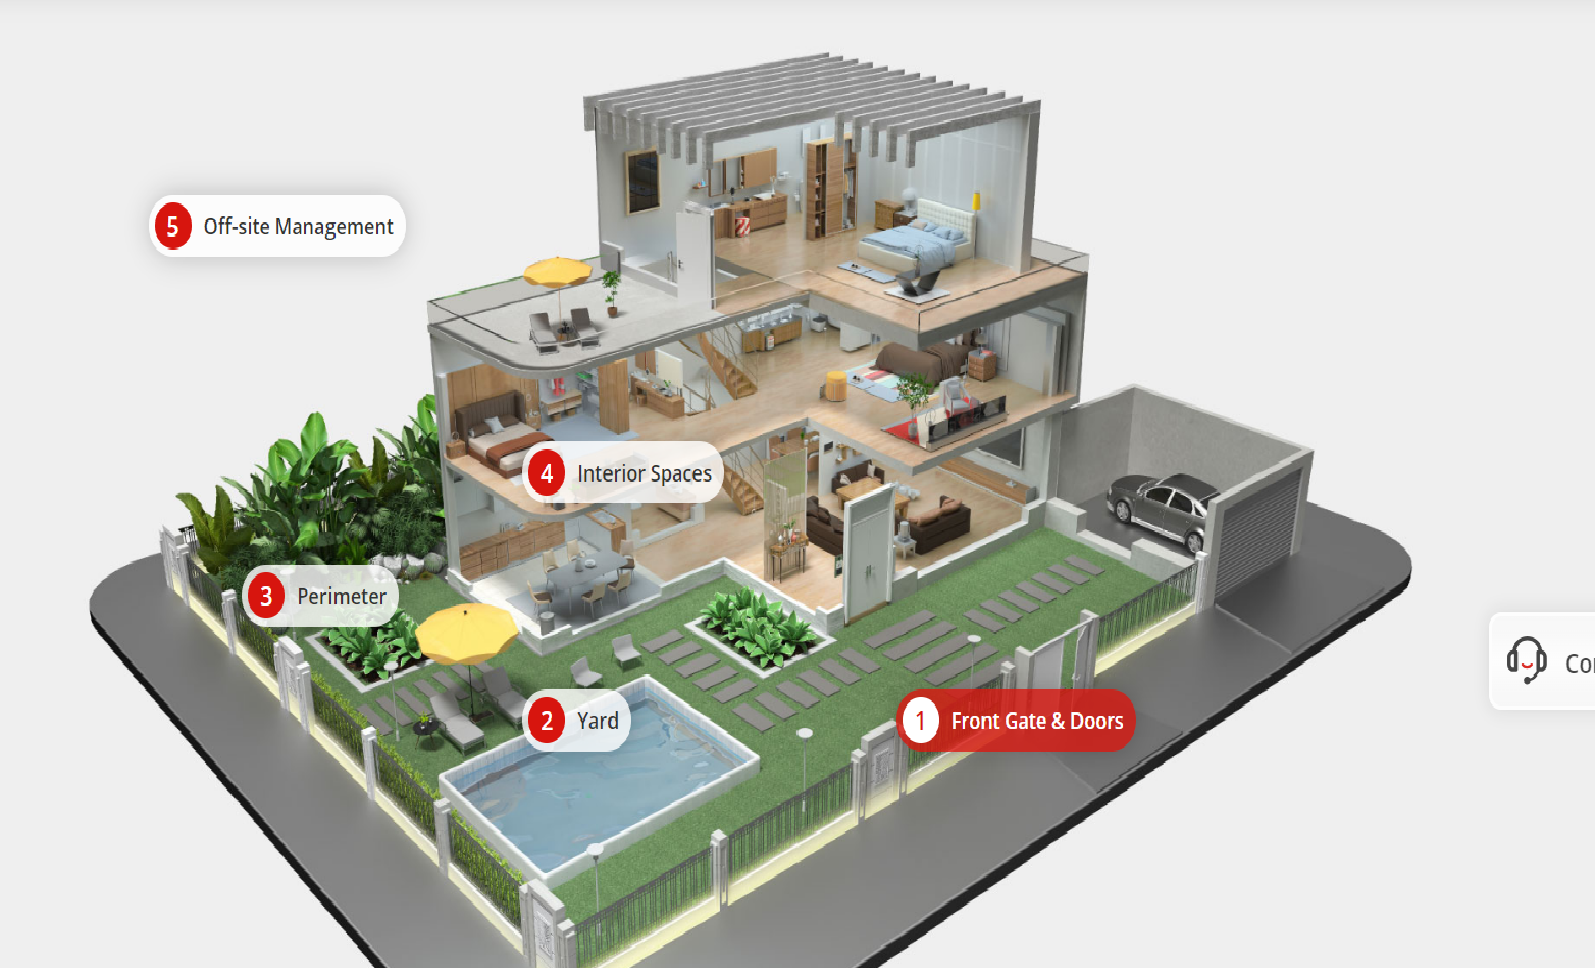 How to improve residential security management with help of advanced security systems and solutions?